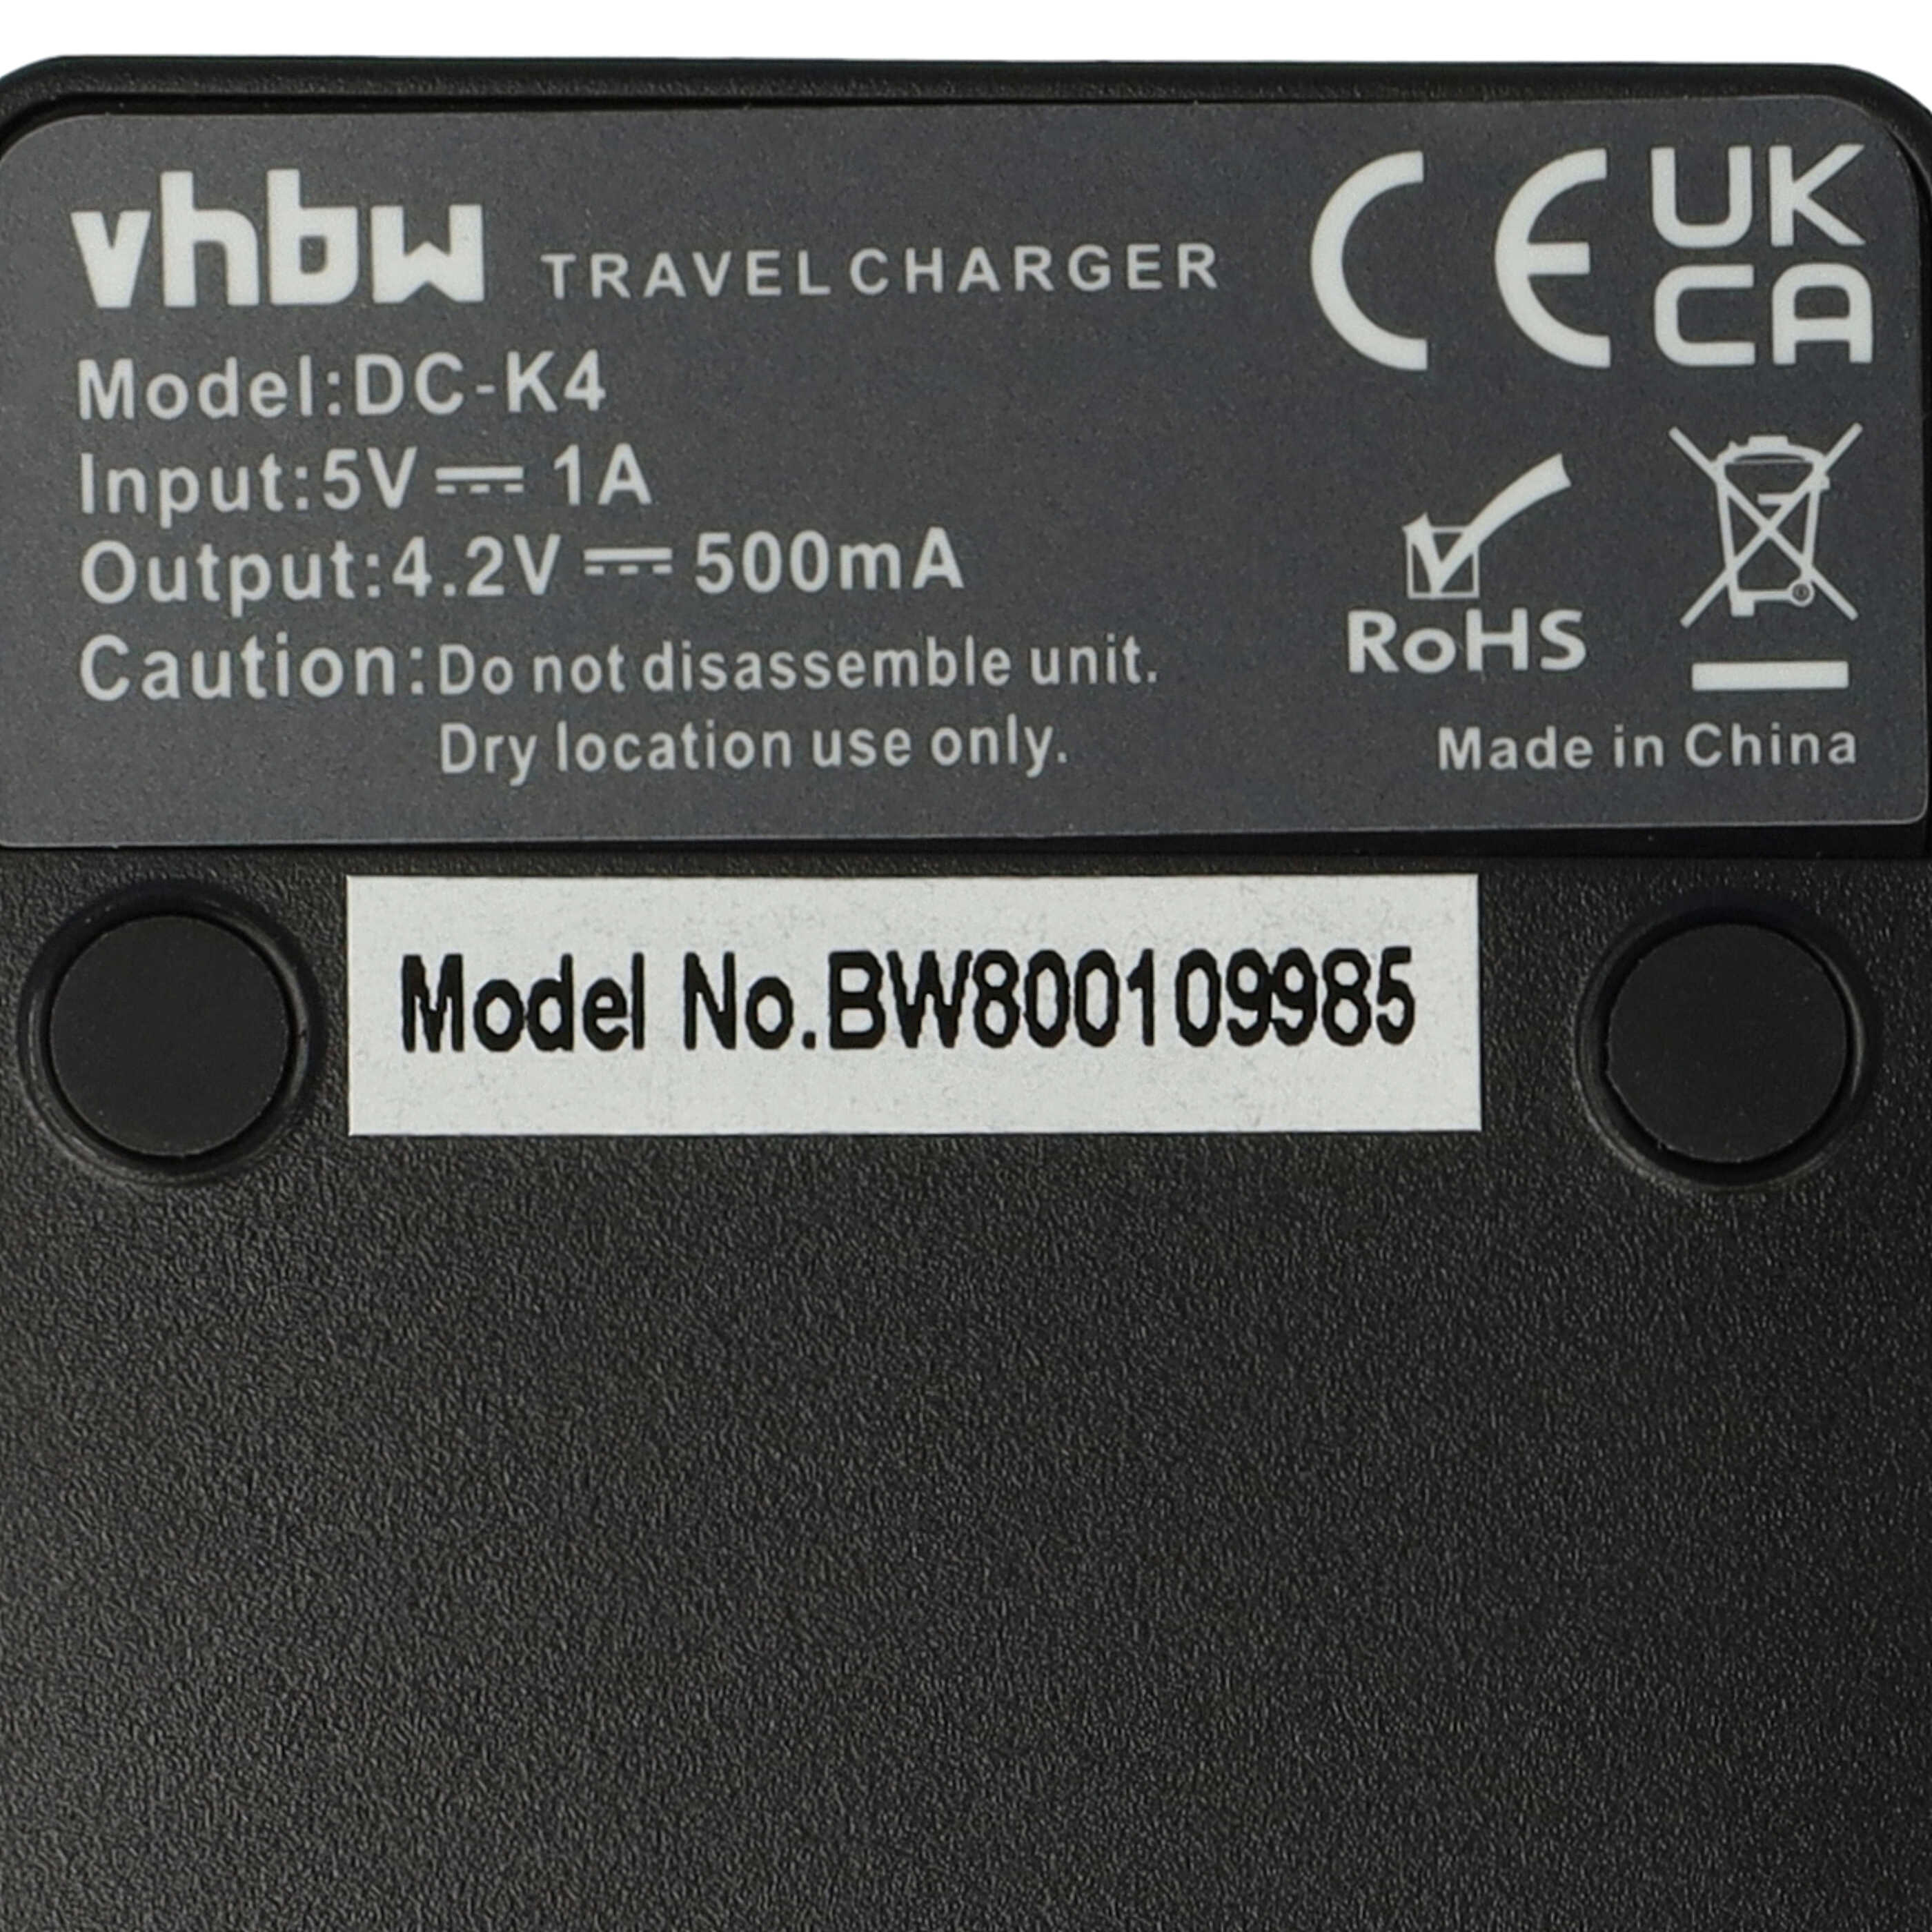 Battery Charger suitable for Lumix DMC-FT7 Camera etc. - 0.5 A, 4.2 V